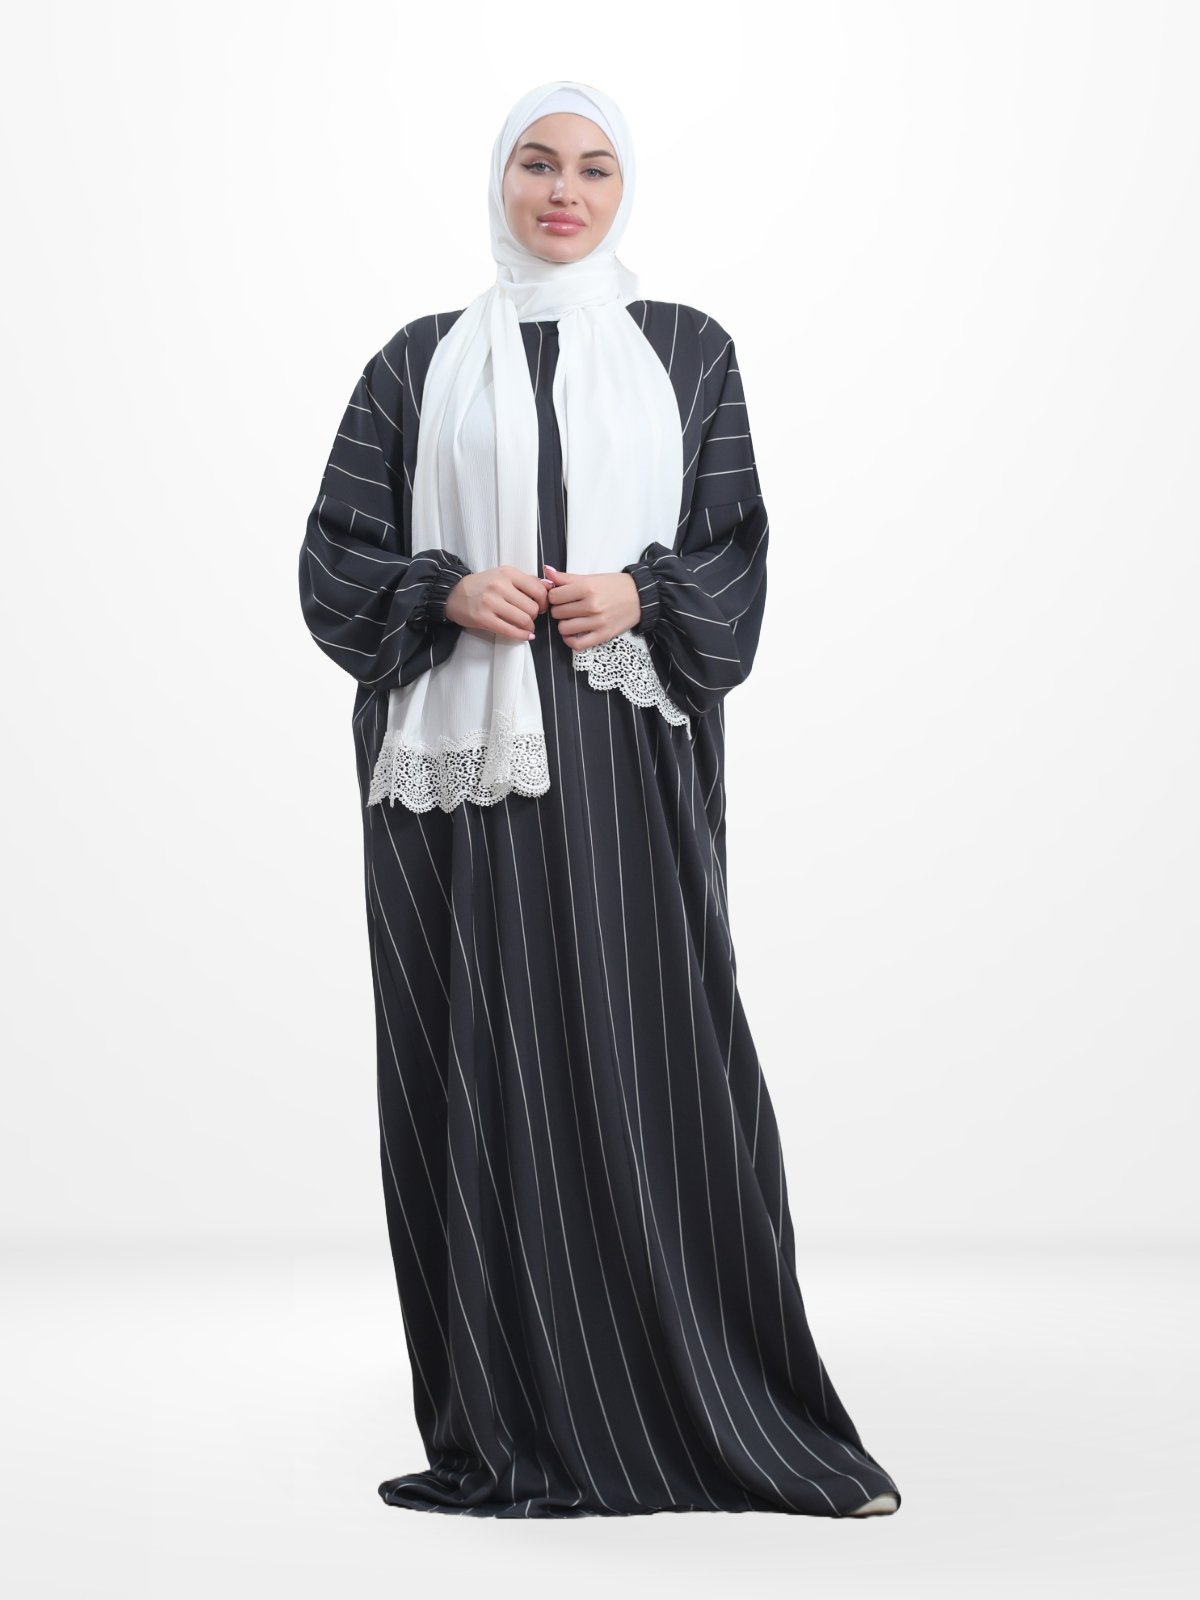 One - Piece Prayer Dress & Abaya with attached Hijab - Striped Crepe With White Scarf - Modest Essence